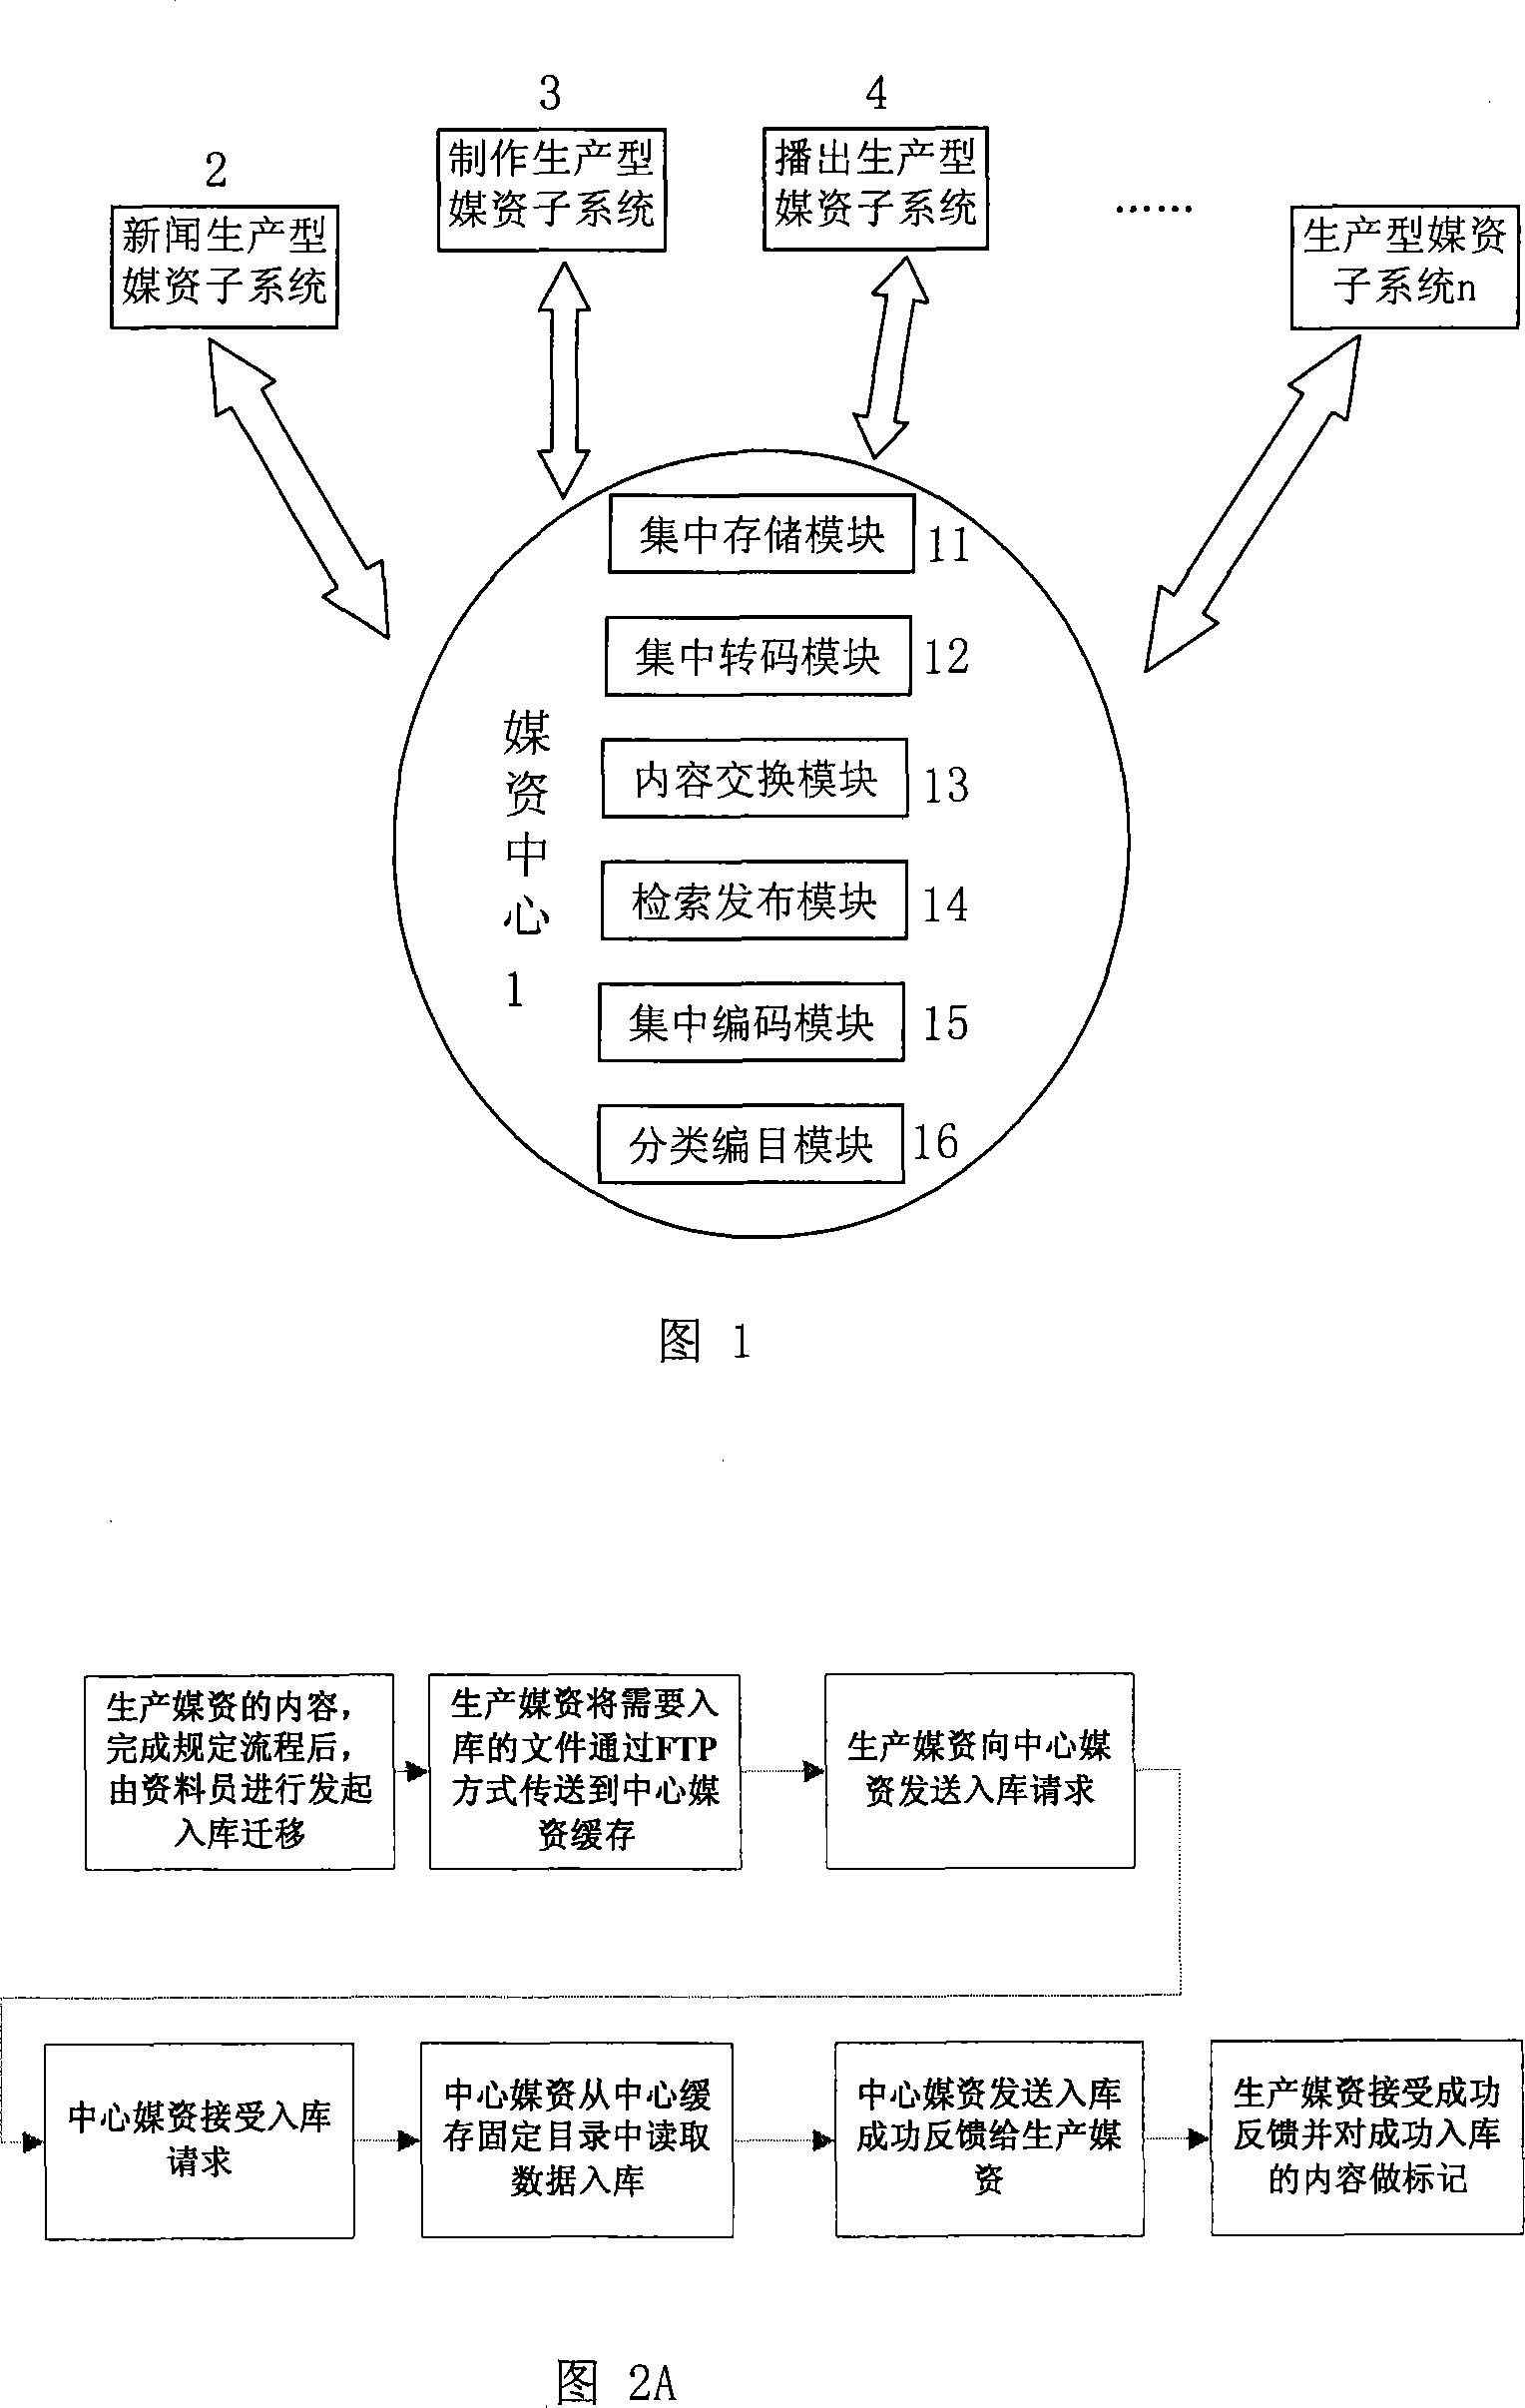 Two-layered structure based media resource system